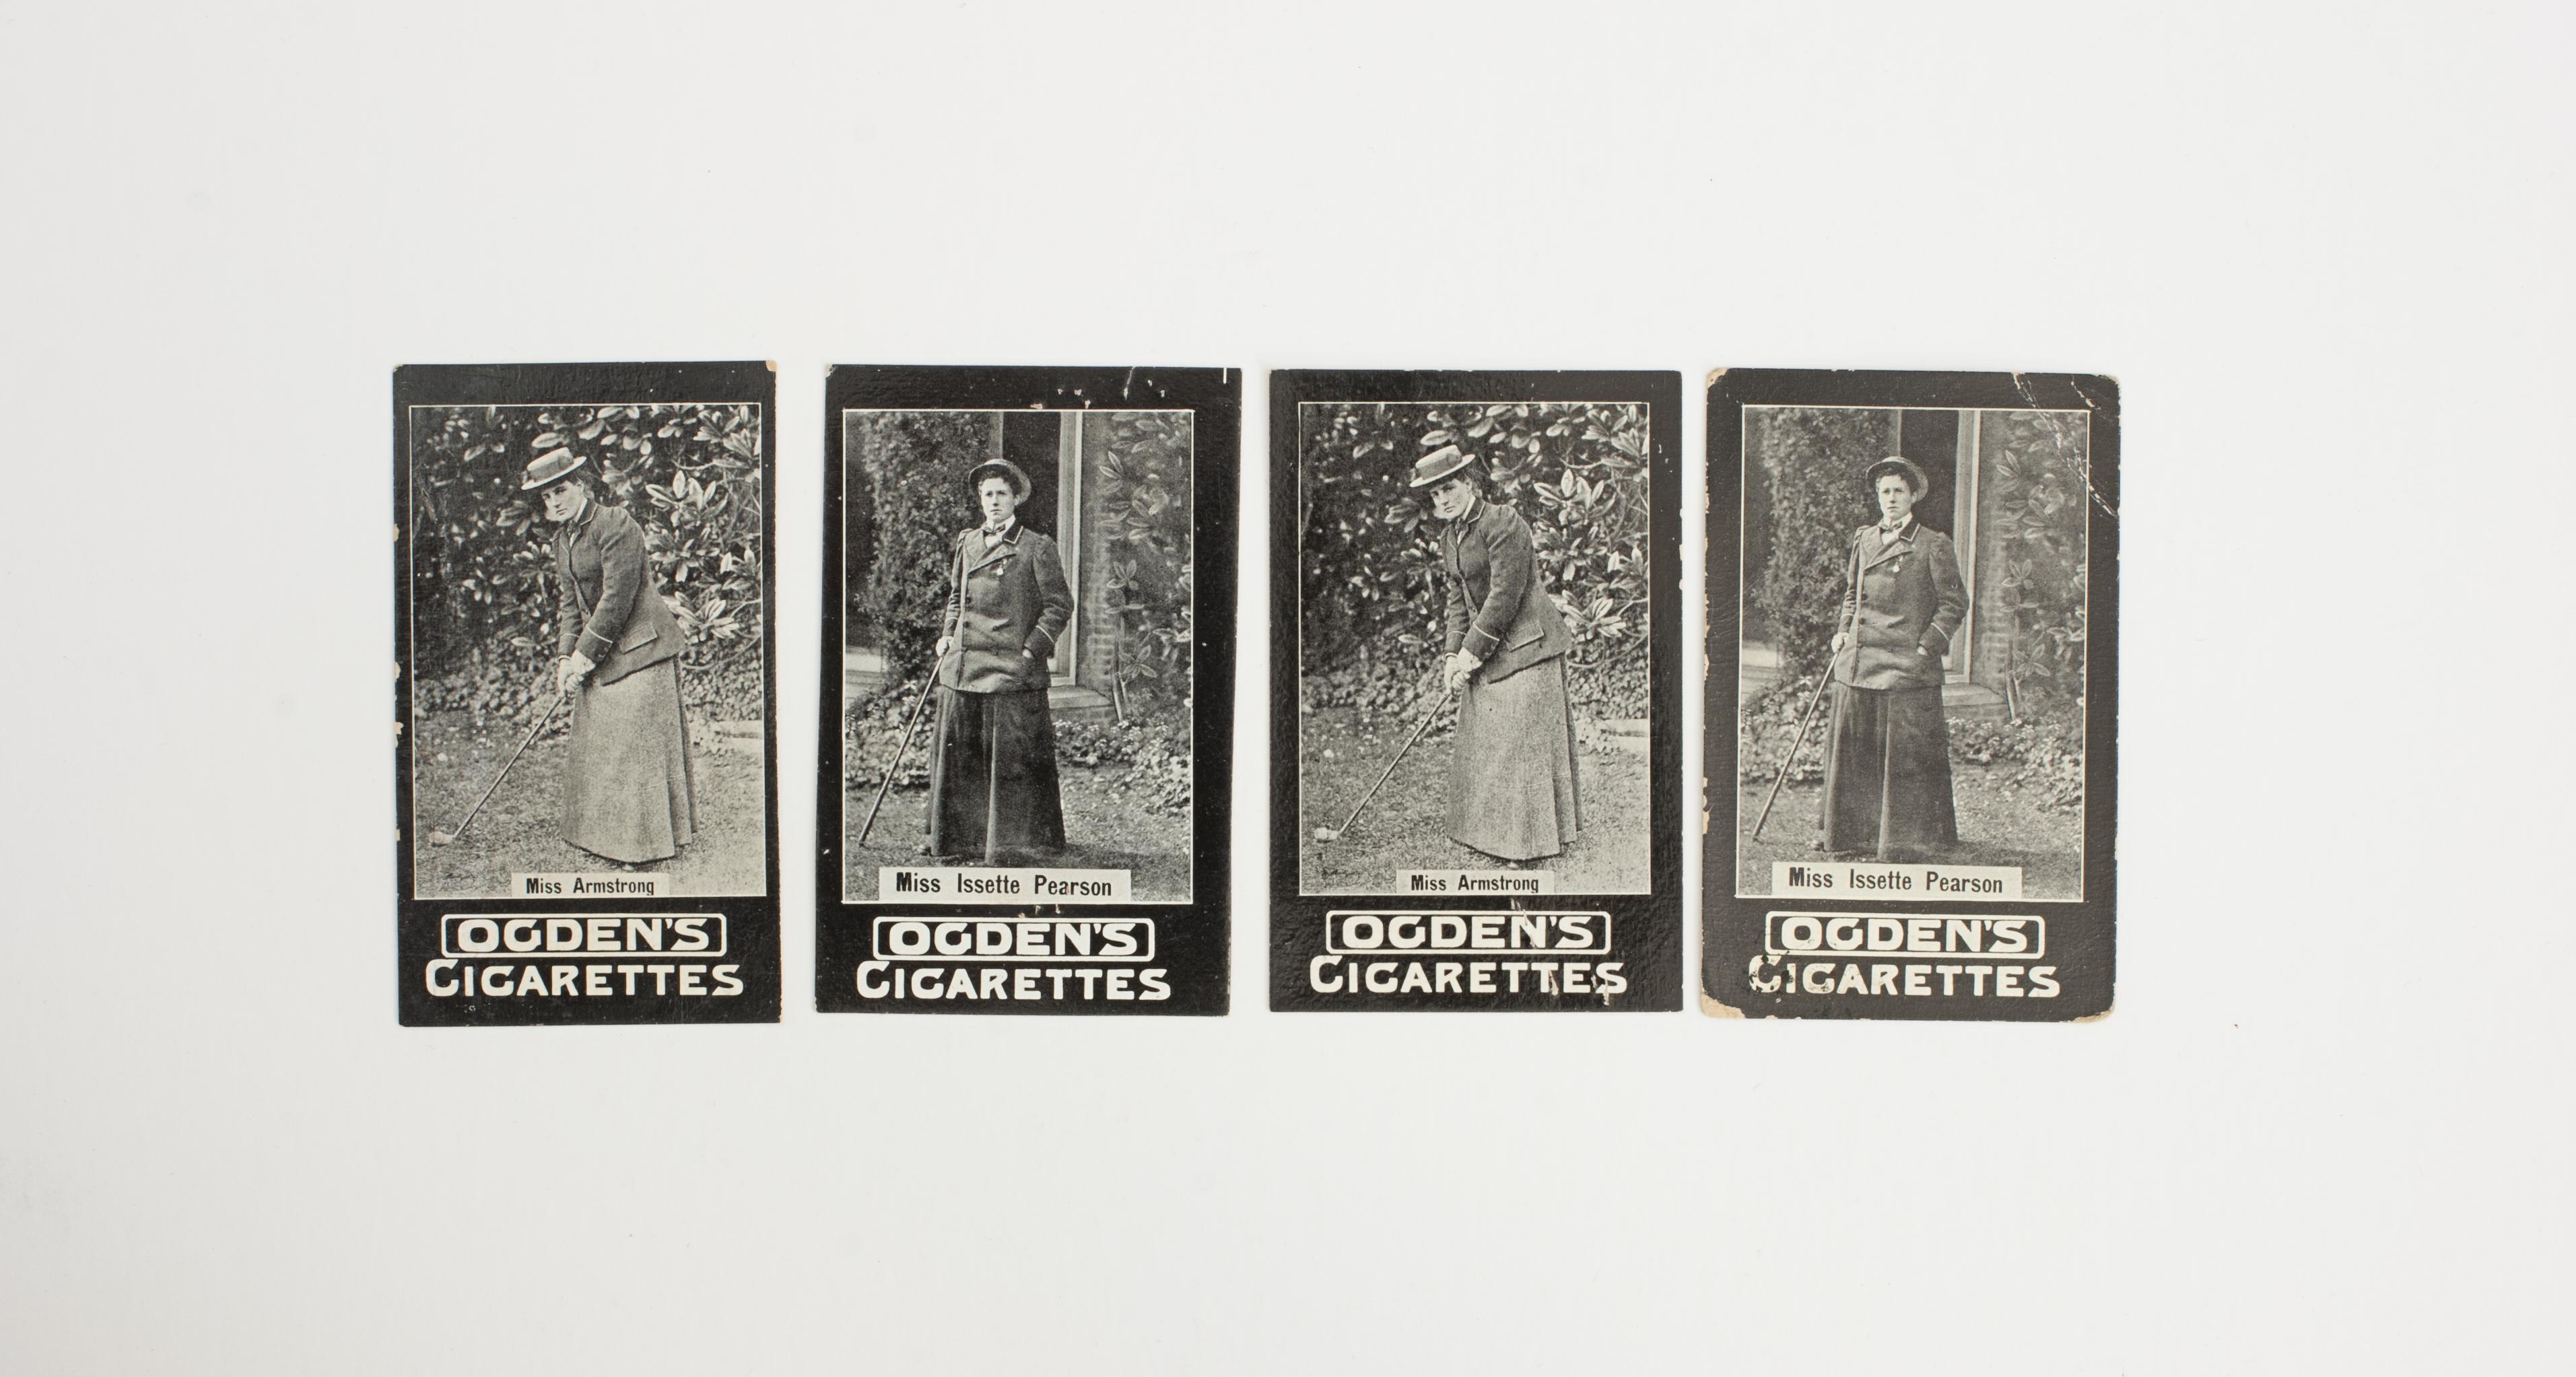 Ogden Tab Cigarette Cards Of Ladies Golfers.
The four Ogden Tab Cigarette cards are of two lady golfers, Miss Issette Pearson and Miss Armstrong. The Ogden's cigarette cards are with distinctive black borders, white block print and a main photo